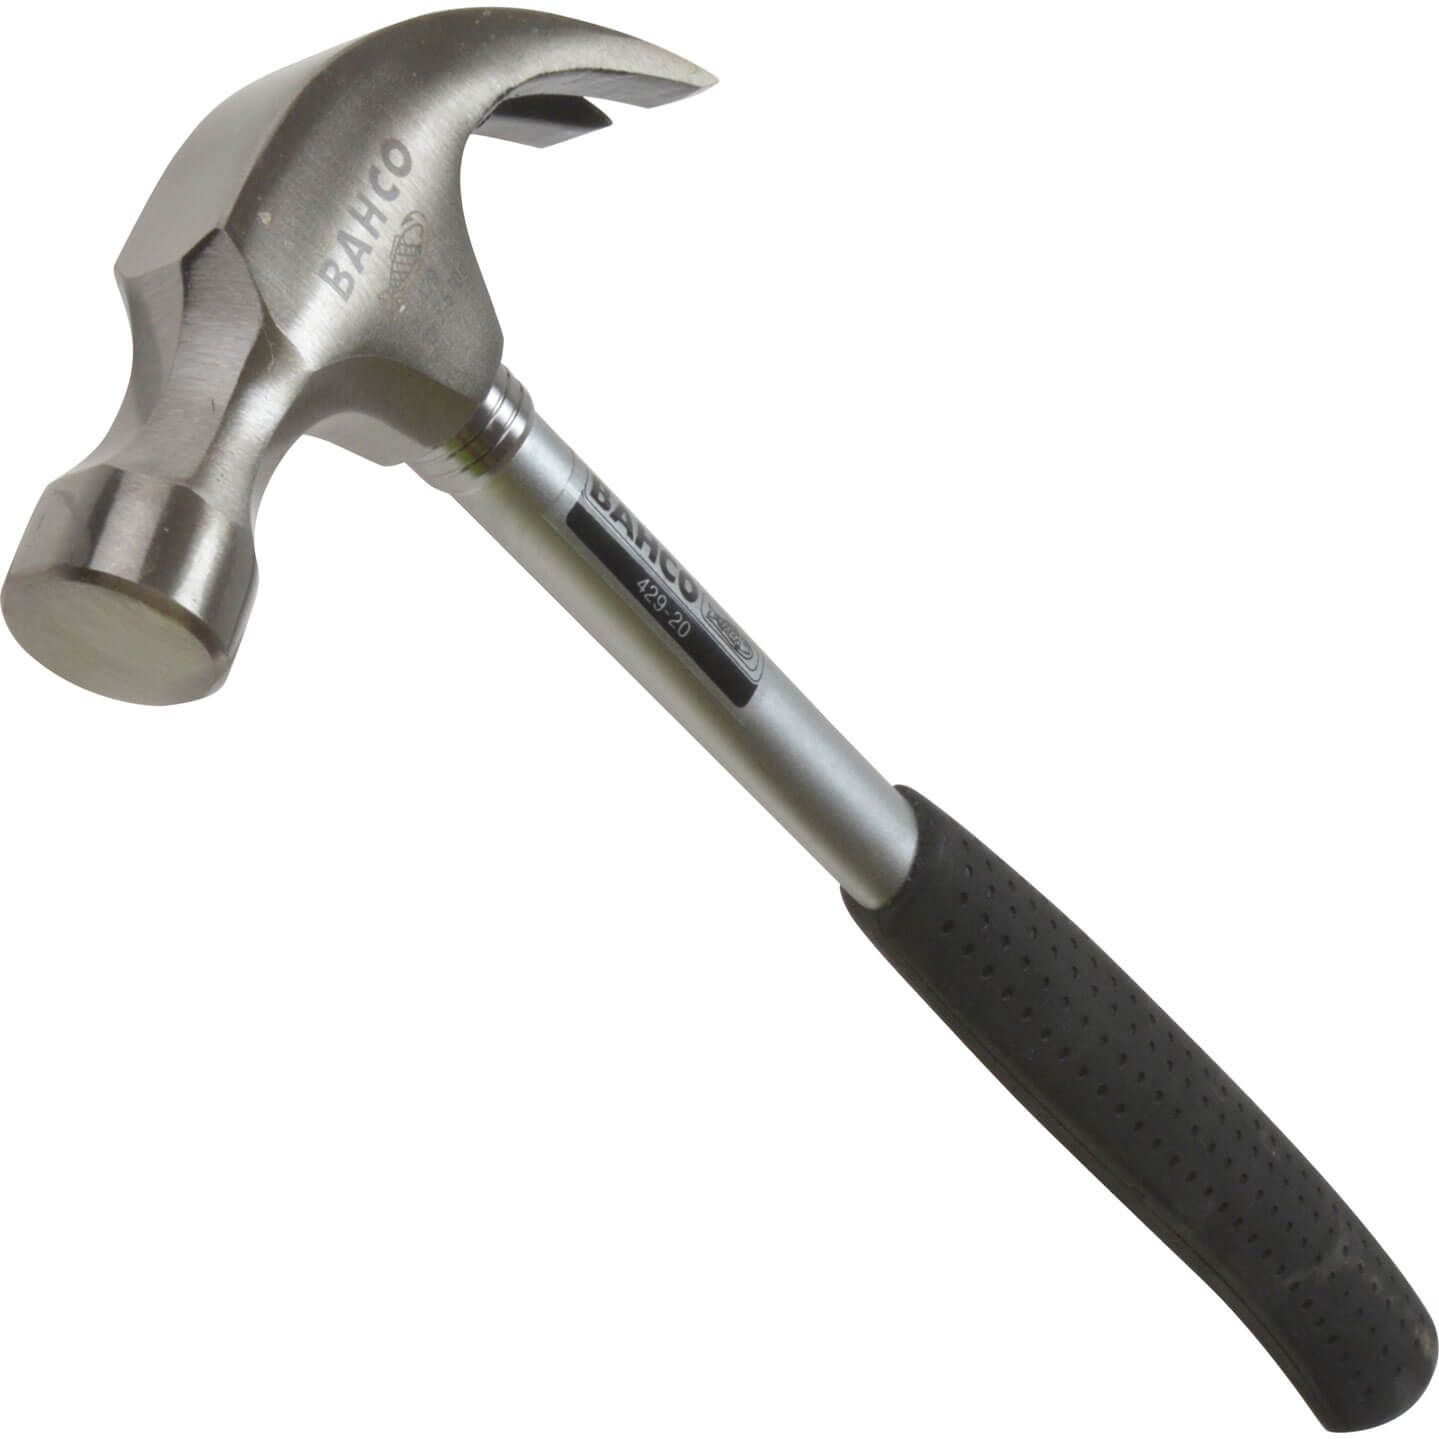 Image of Bahco Claw Hammer Steel Handle 570g